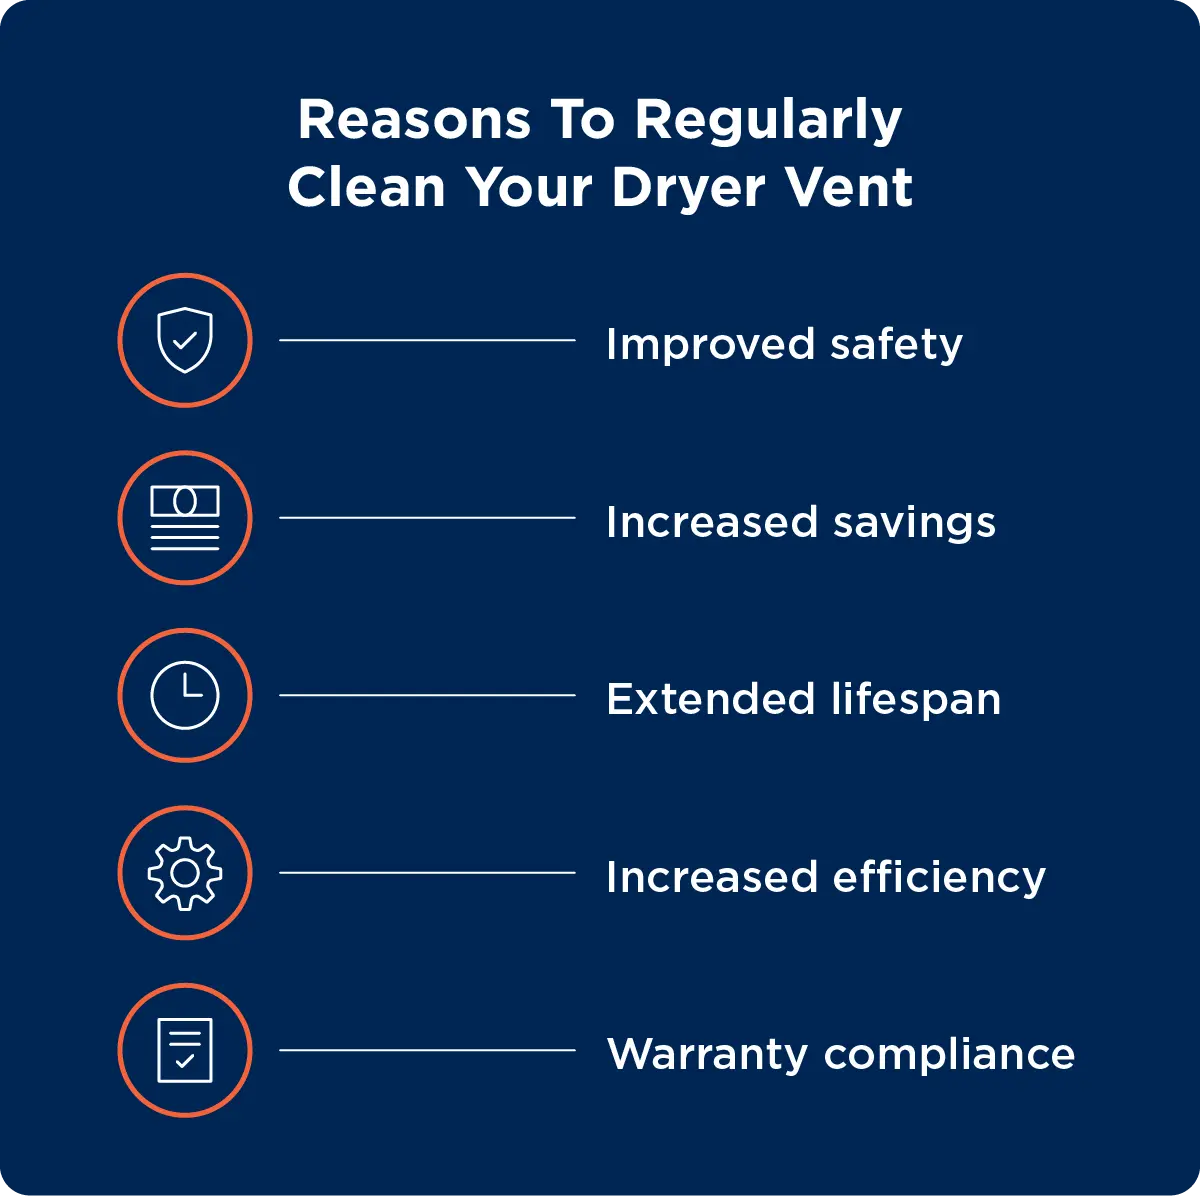 The benefits of dryer vent maintenance: improved safety, increased savings, extended lifespan, increased efficiency, warranty compliance.